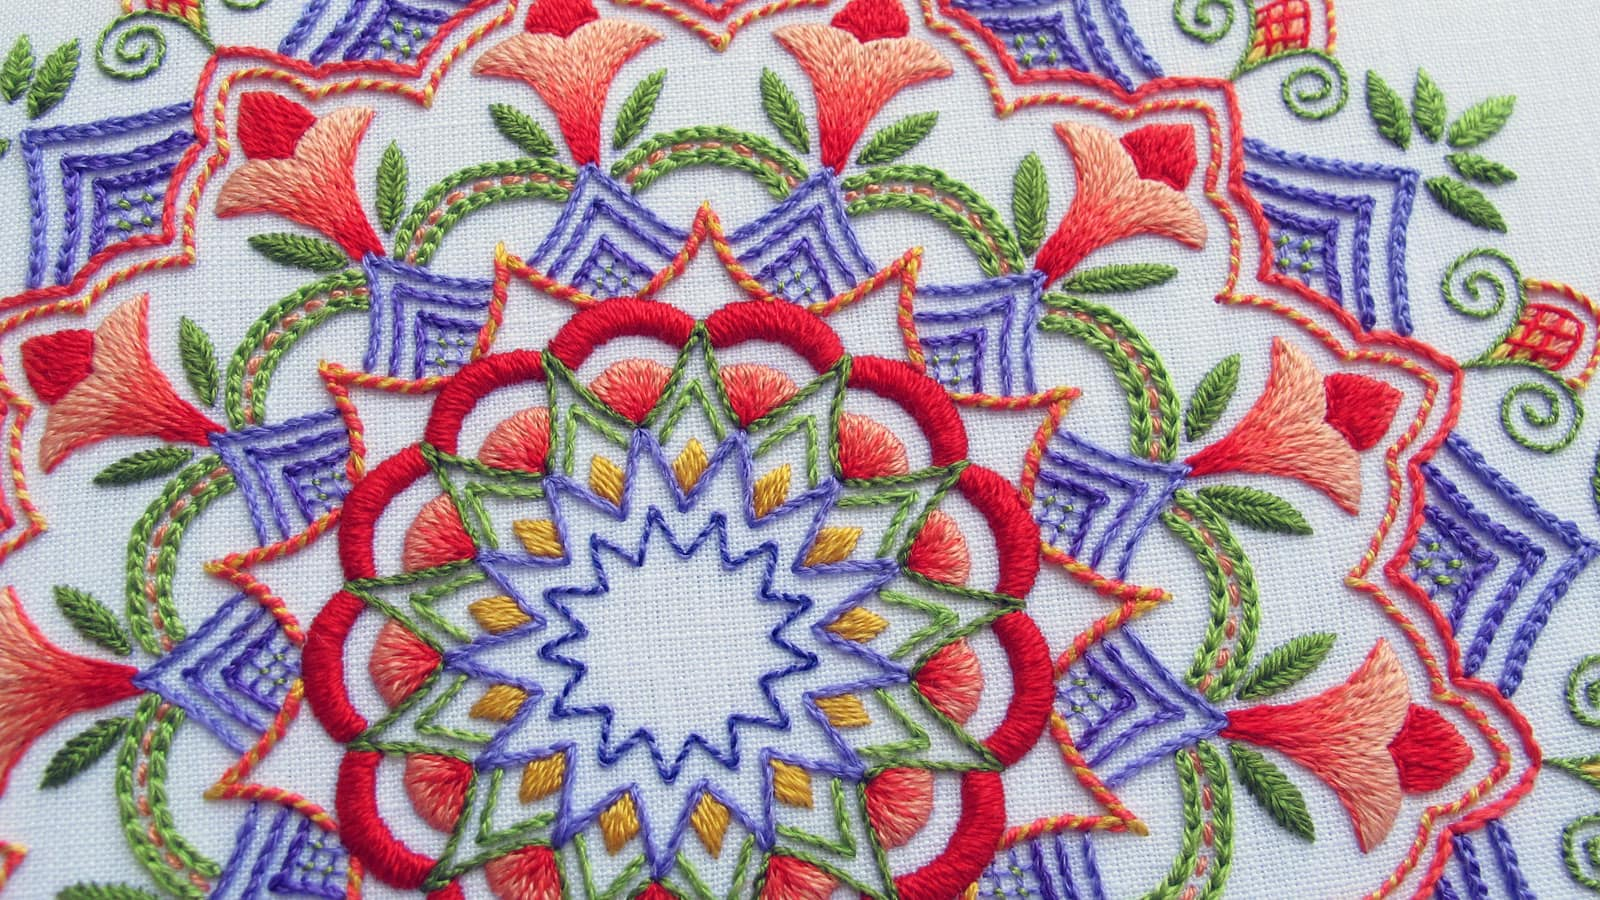 Jacobean Embroidery Patterns Free Needlenthread Tips Tricks And Great Resources For Hand Embroidery